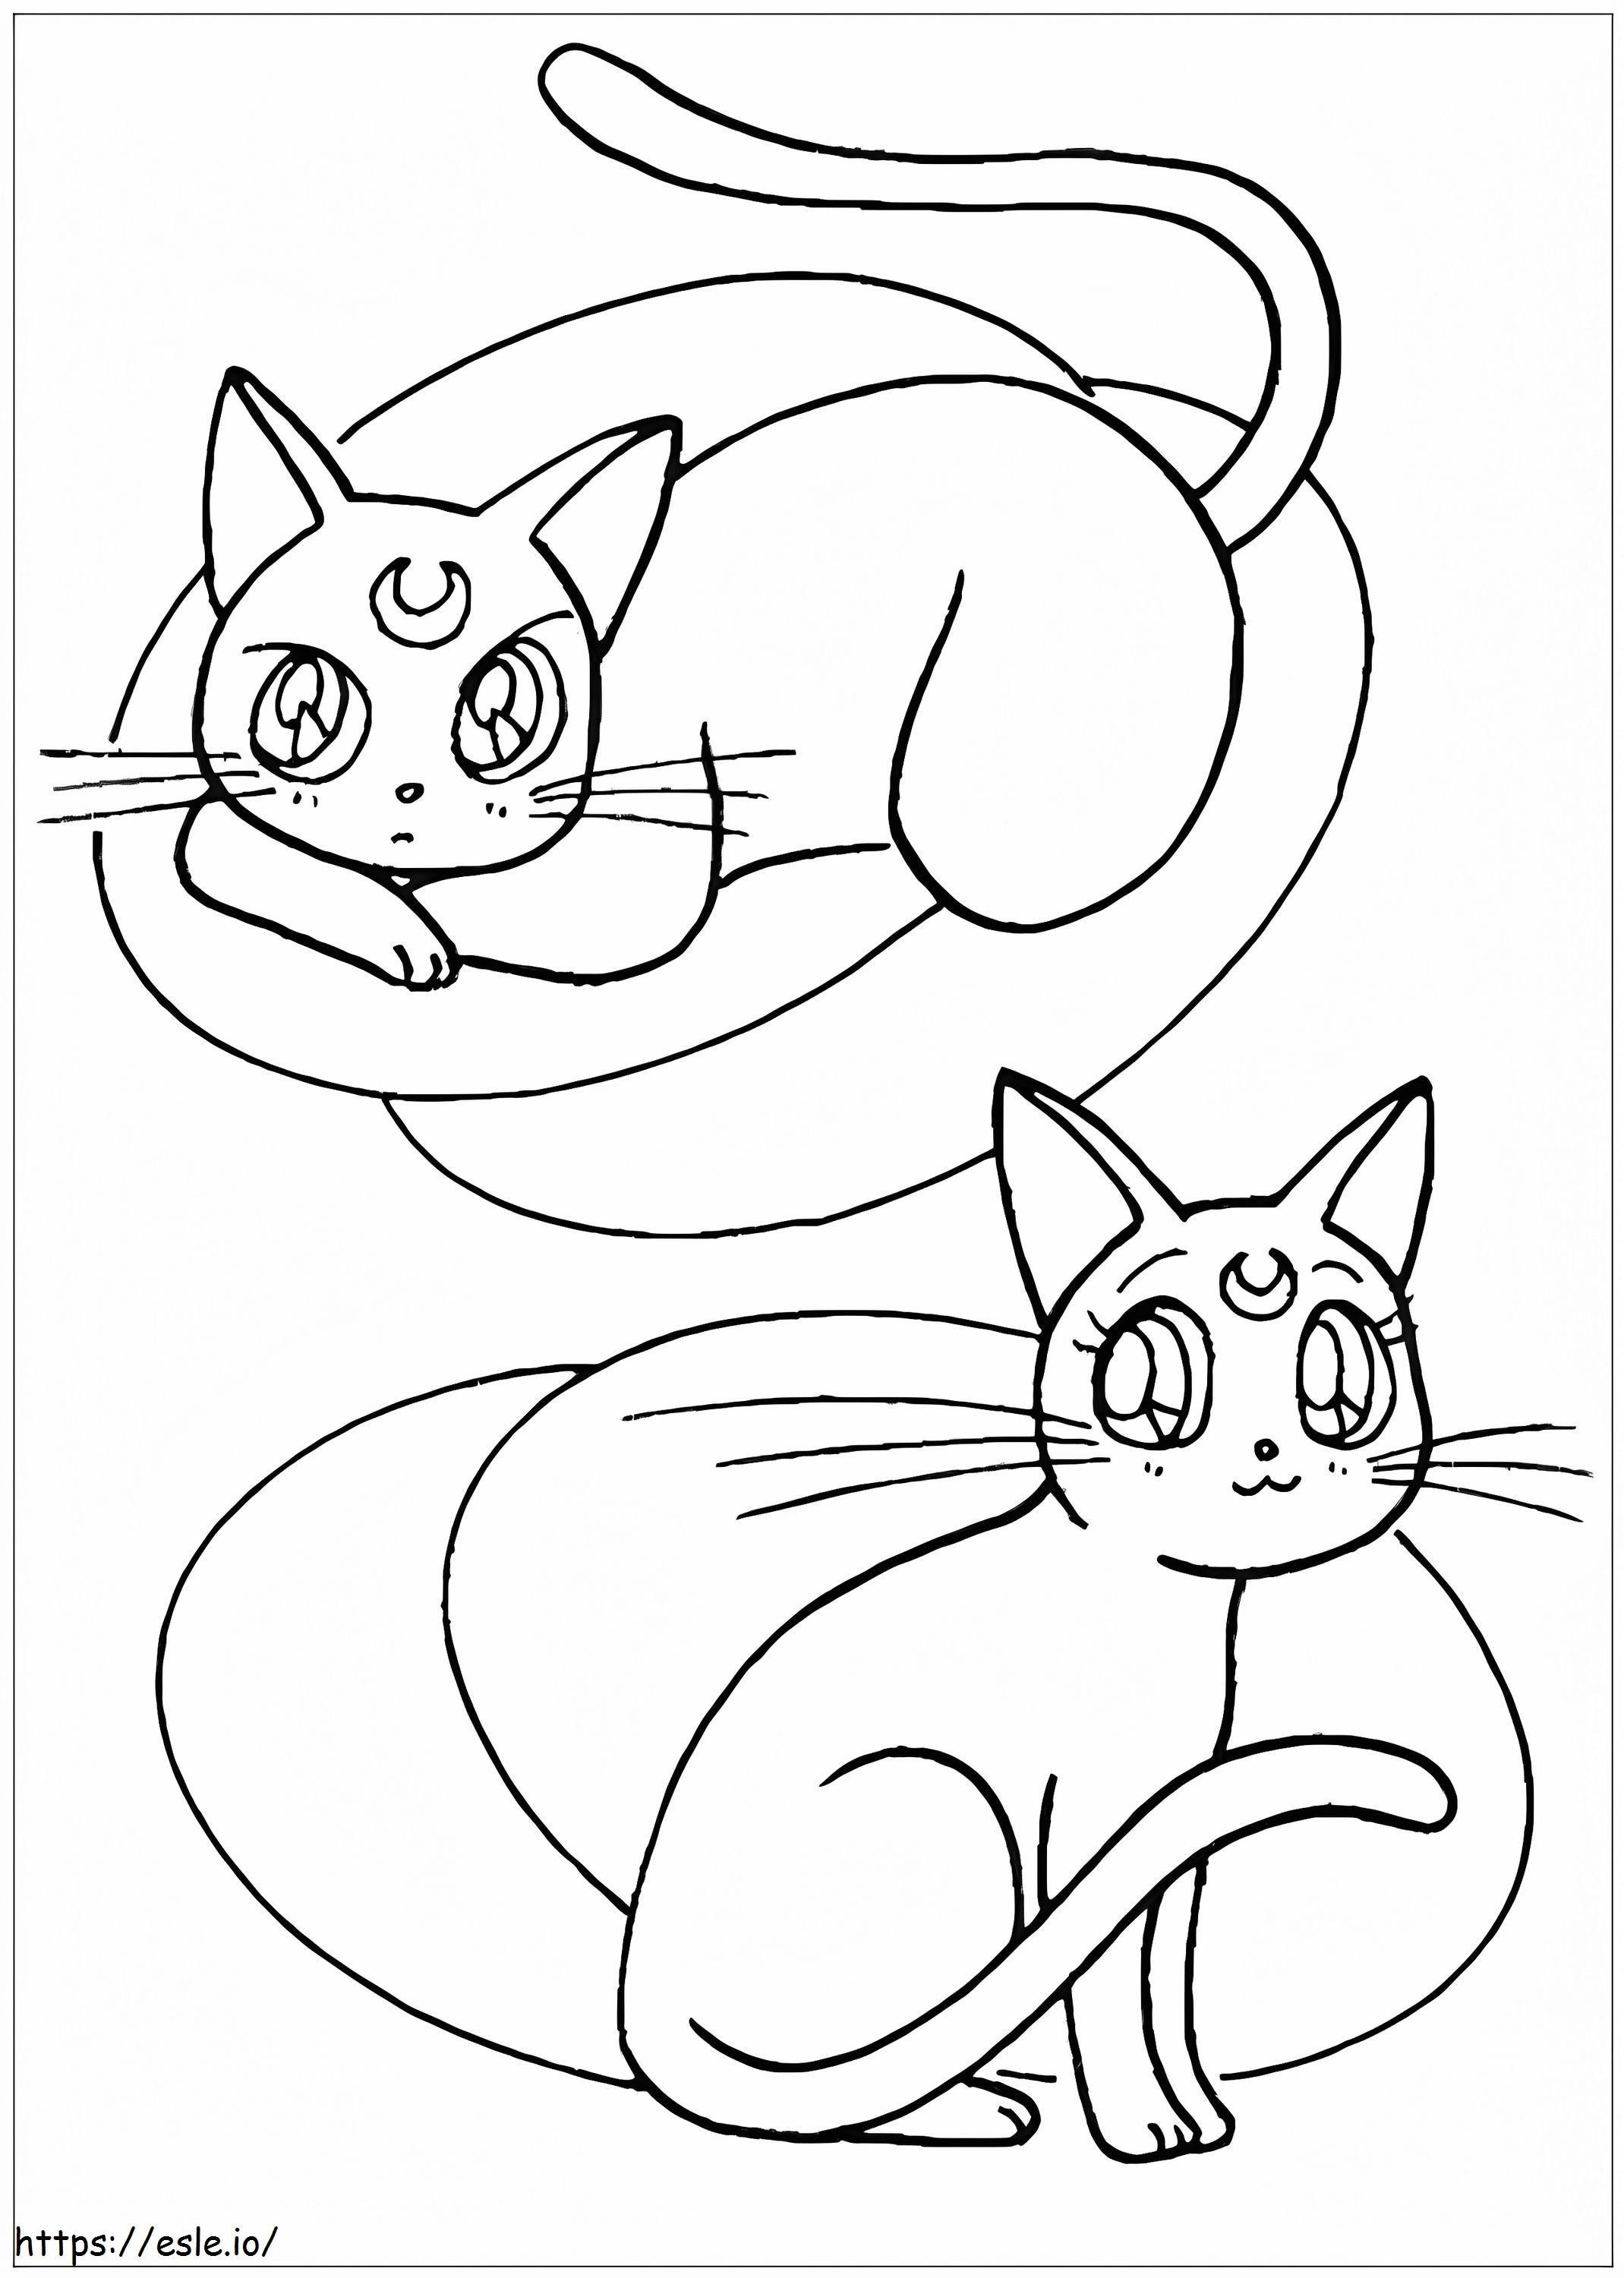 Two Cute Warrior Cats coloring page